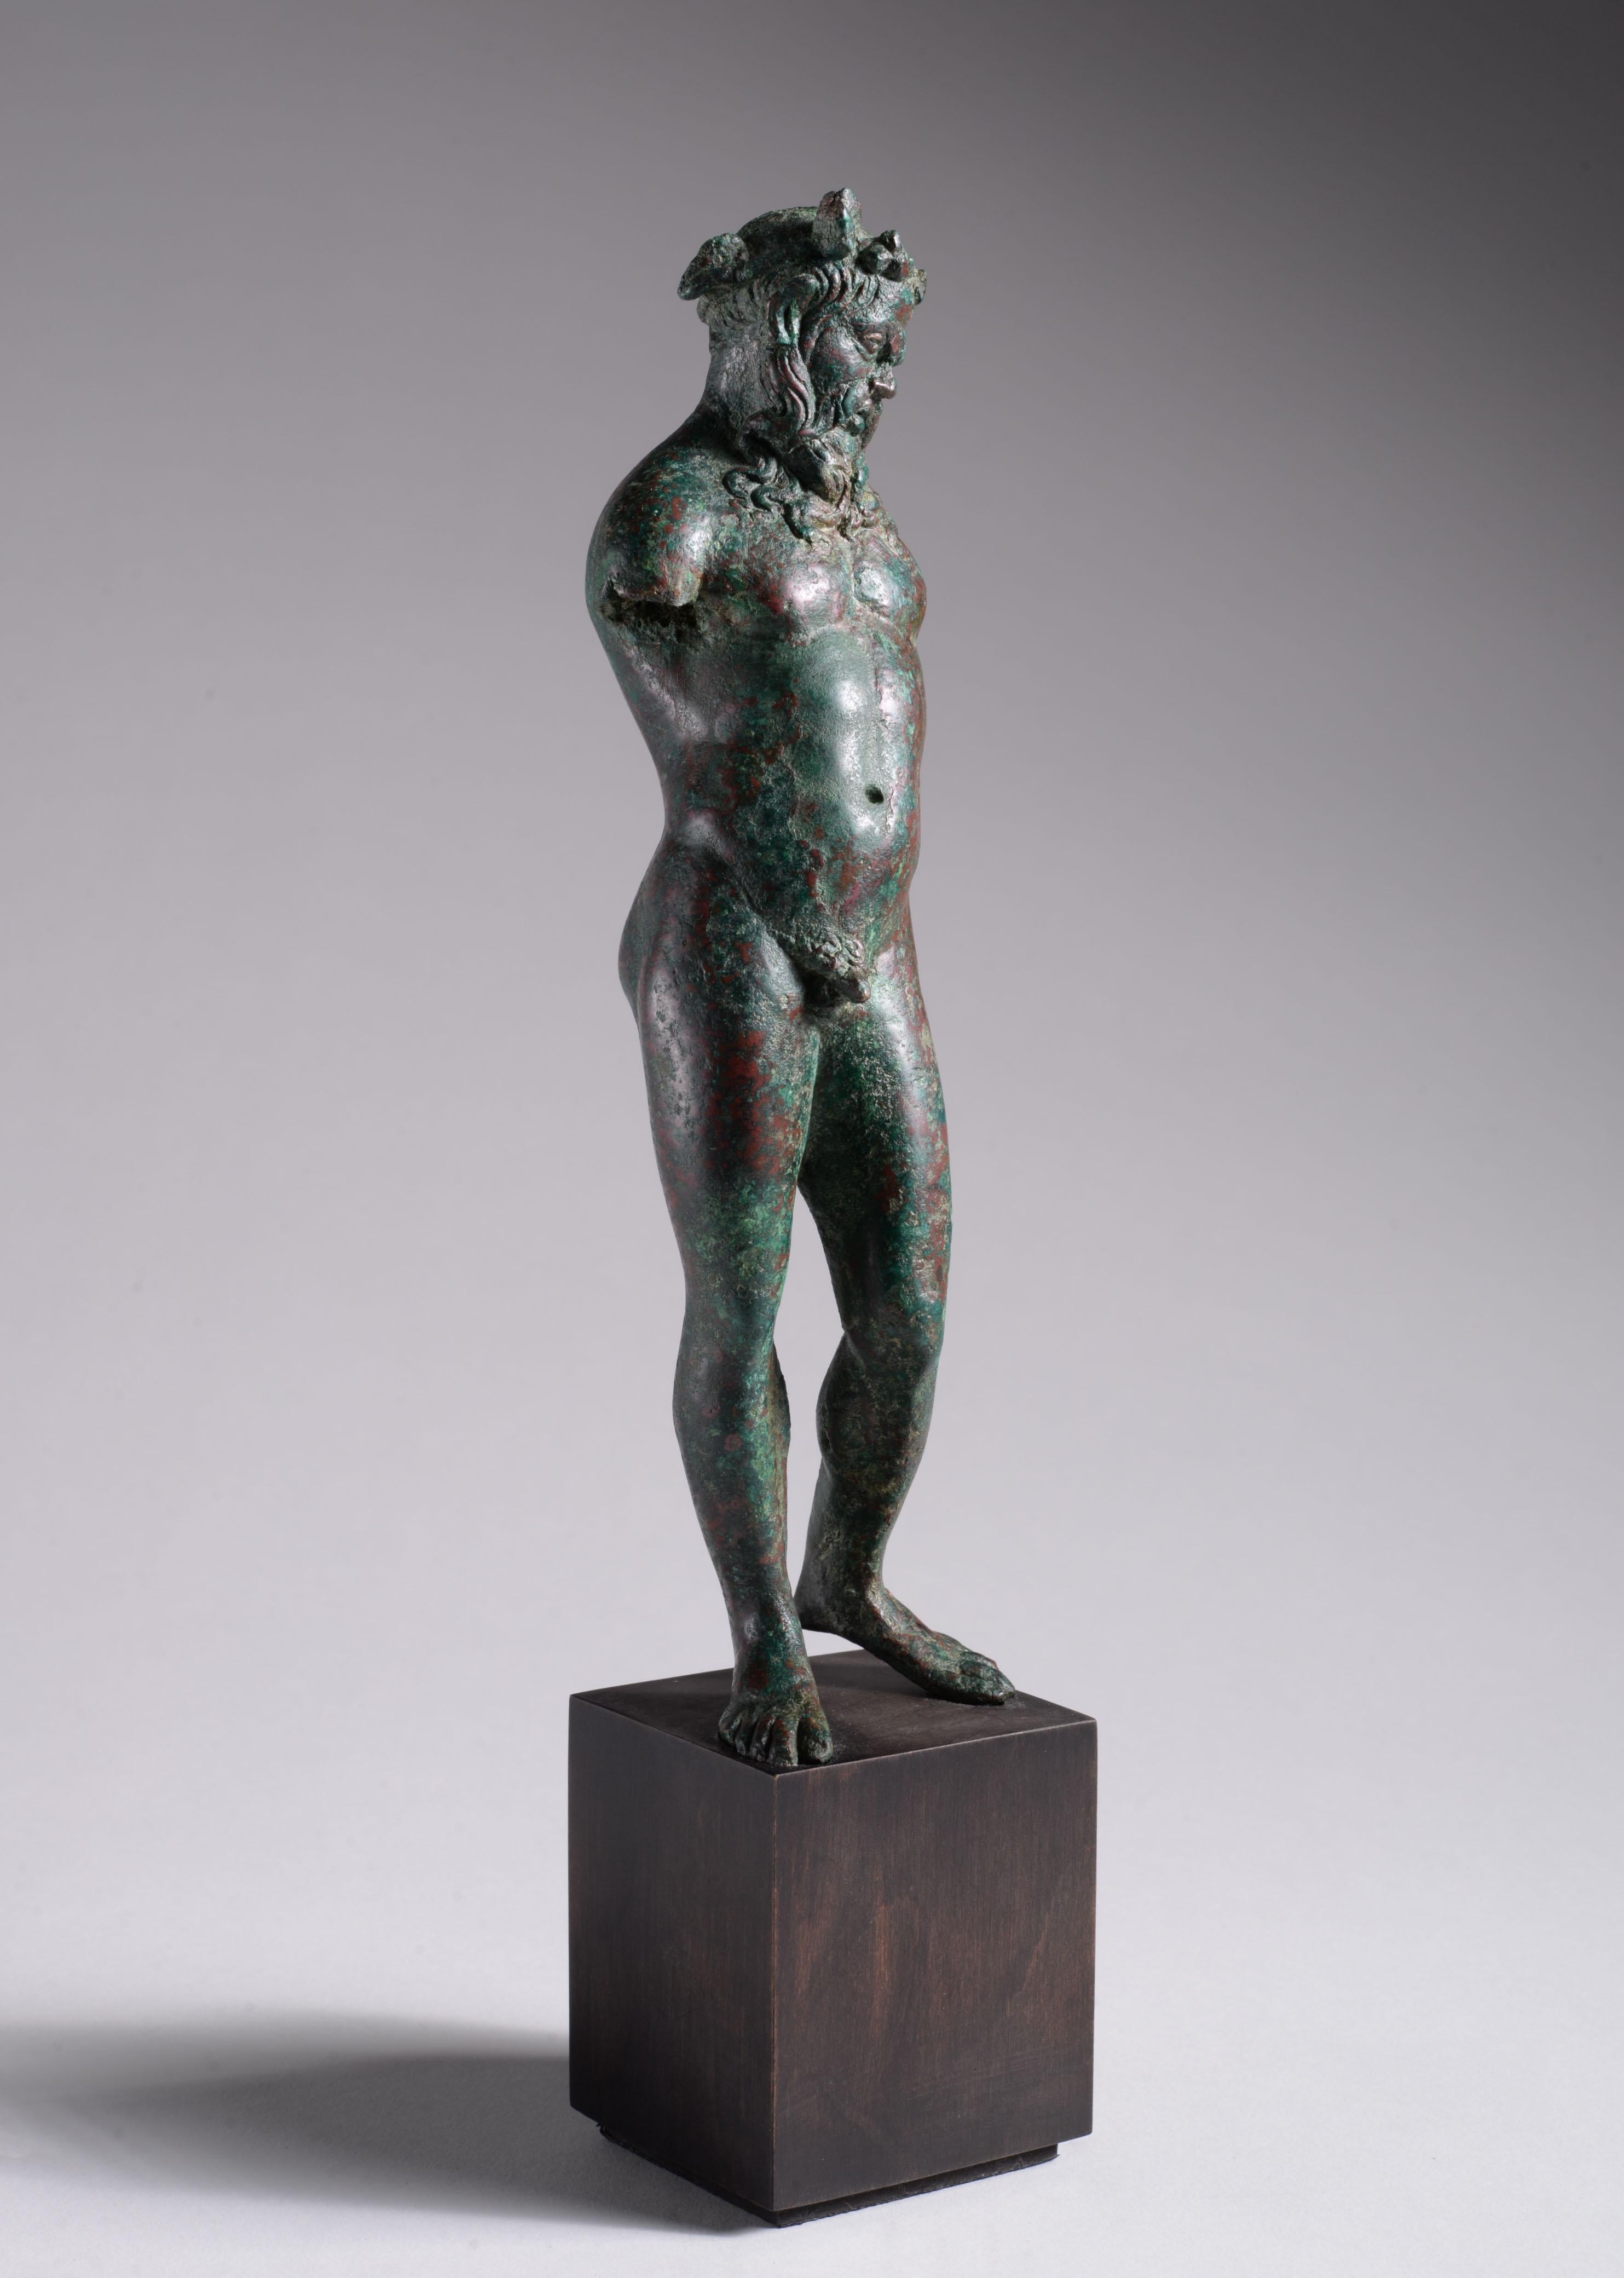 Beautifully cast statuette of a satyr, Greek, Hellenistic Period, 3rd-2nd Century BC, solid cast bronze

The present work is a wonderful example of the finest Hellenistic style. The satyr stands in contrapposto, with his weight on the right leg, the